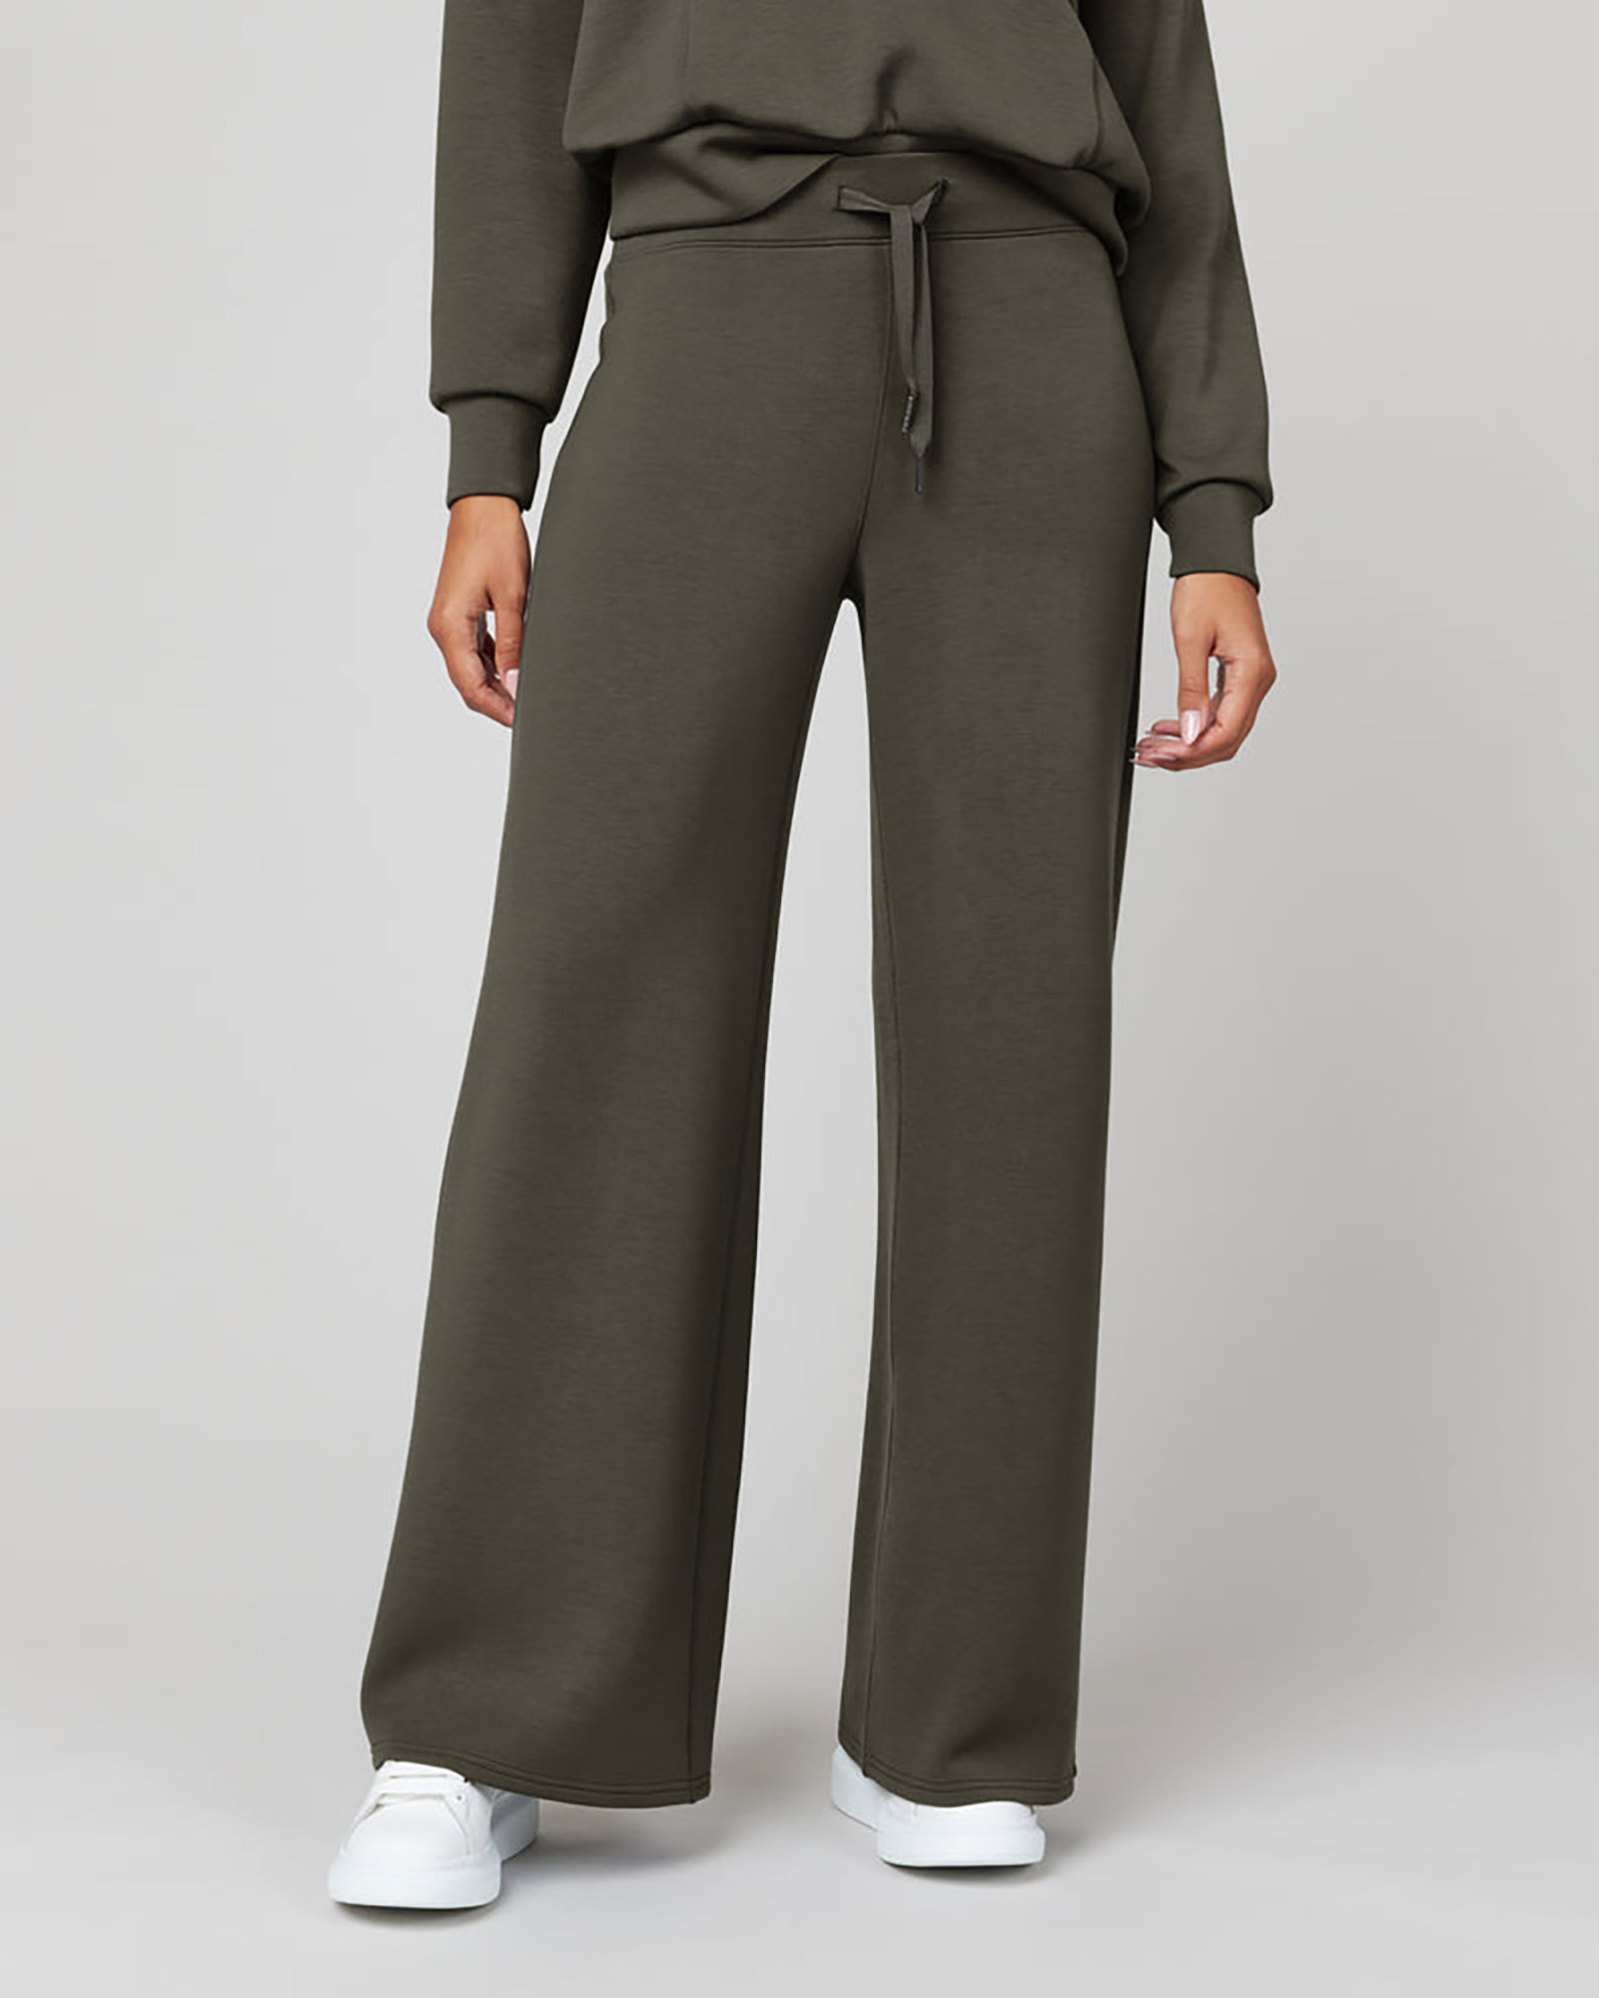 Spanx AirEssentials Wide Leg Pants Are Our New Go-To | Us Weekly